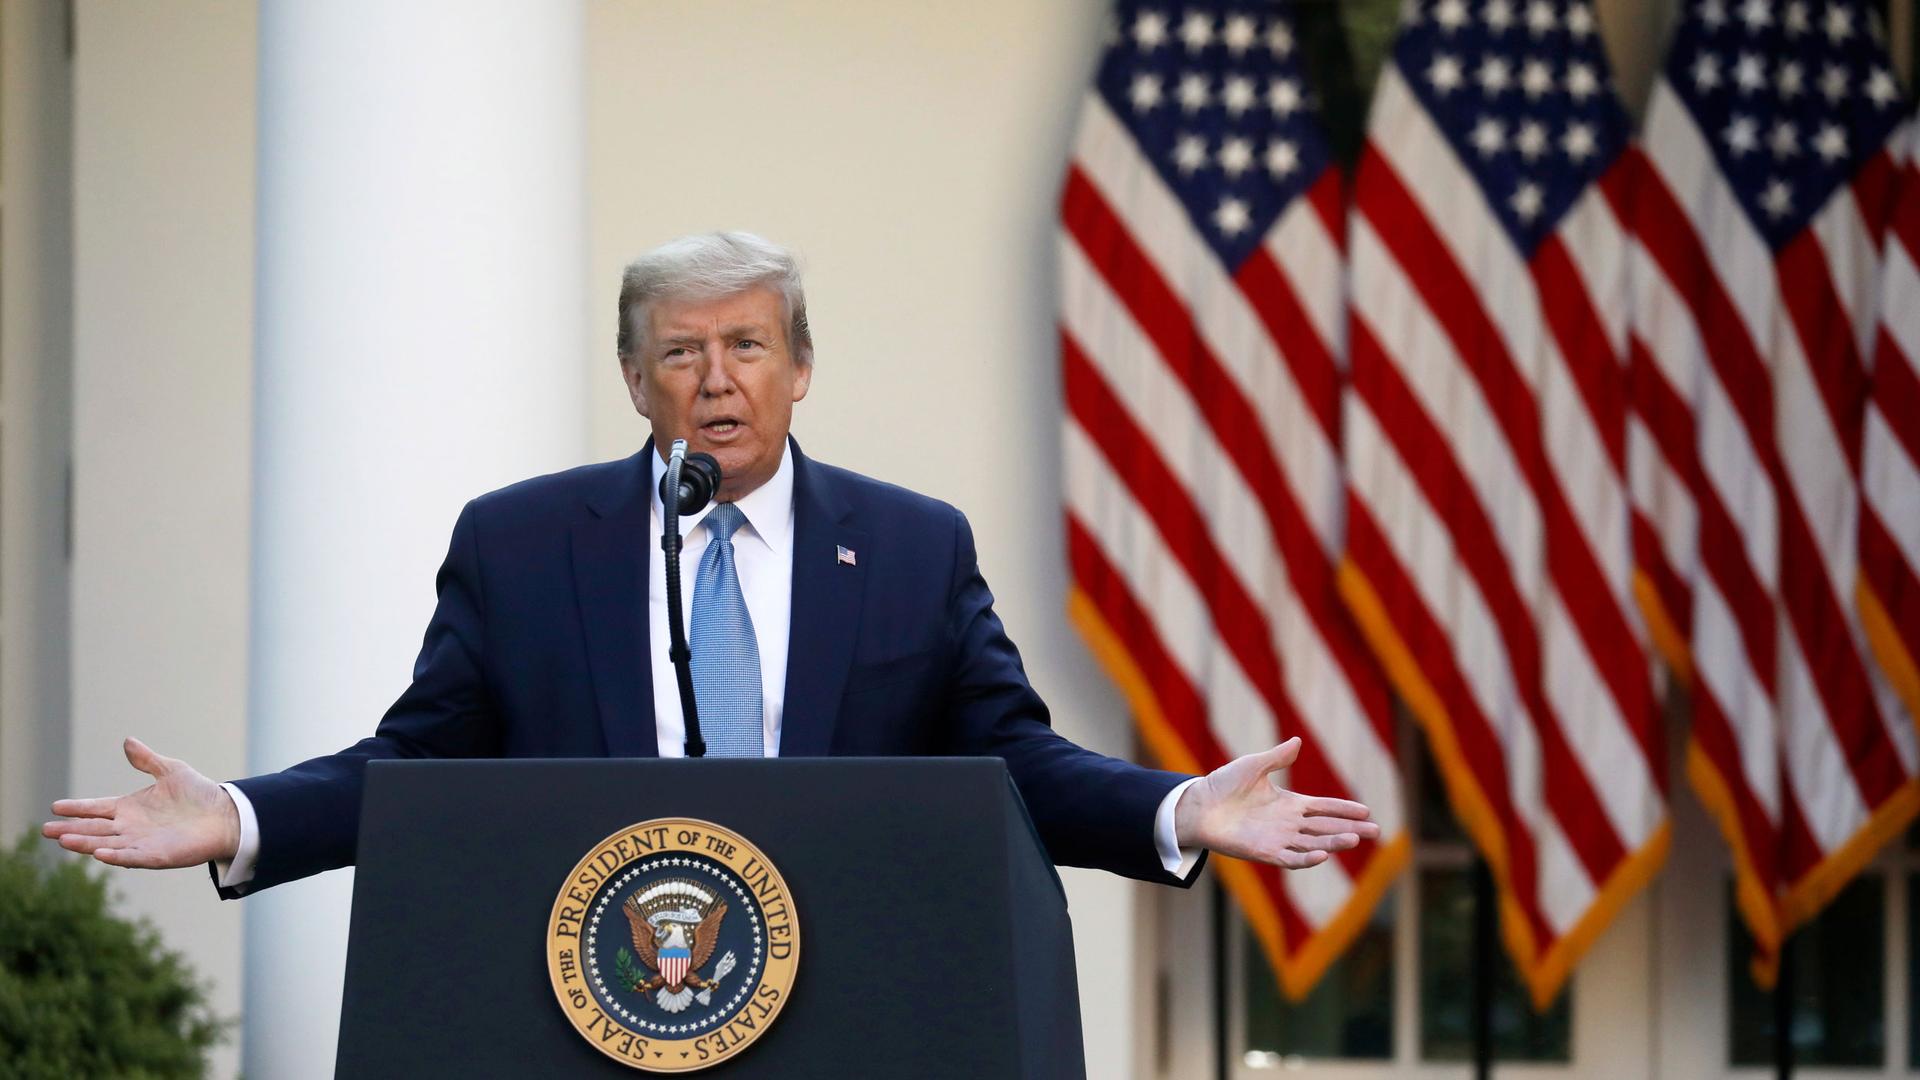 US President Donald Trump is shown standing at a podium with the US Presidency emblem on it with both of his arms outstretched.